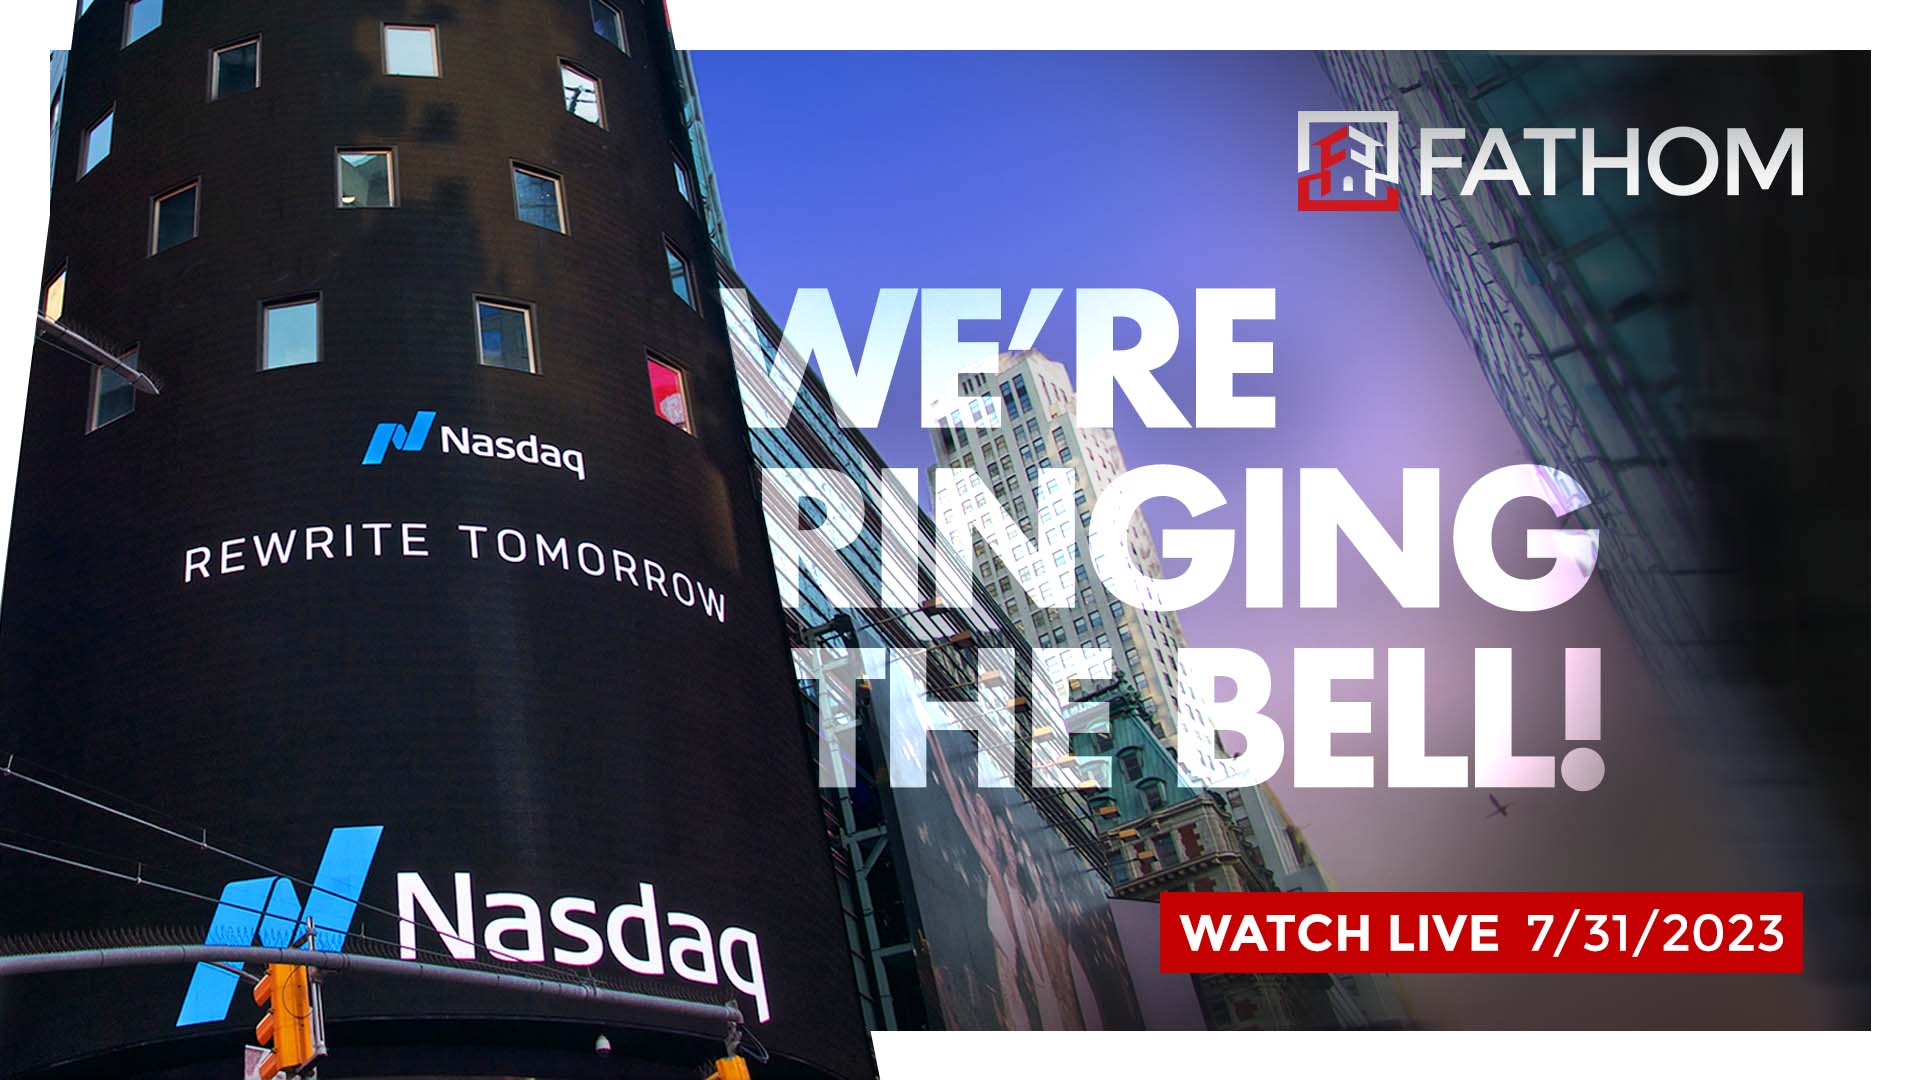 Featured image for “Fathom Holdings, Inc. to Ring Nasdaq Opening Bell on Monday, July 31, 2023, to Celebrate the Third Anniversary of Public Listing”